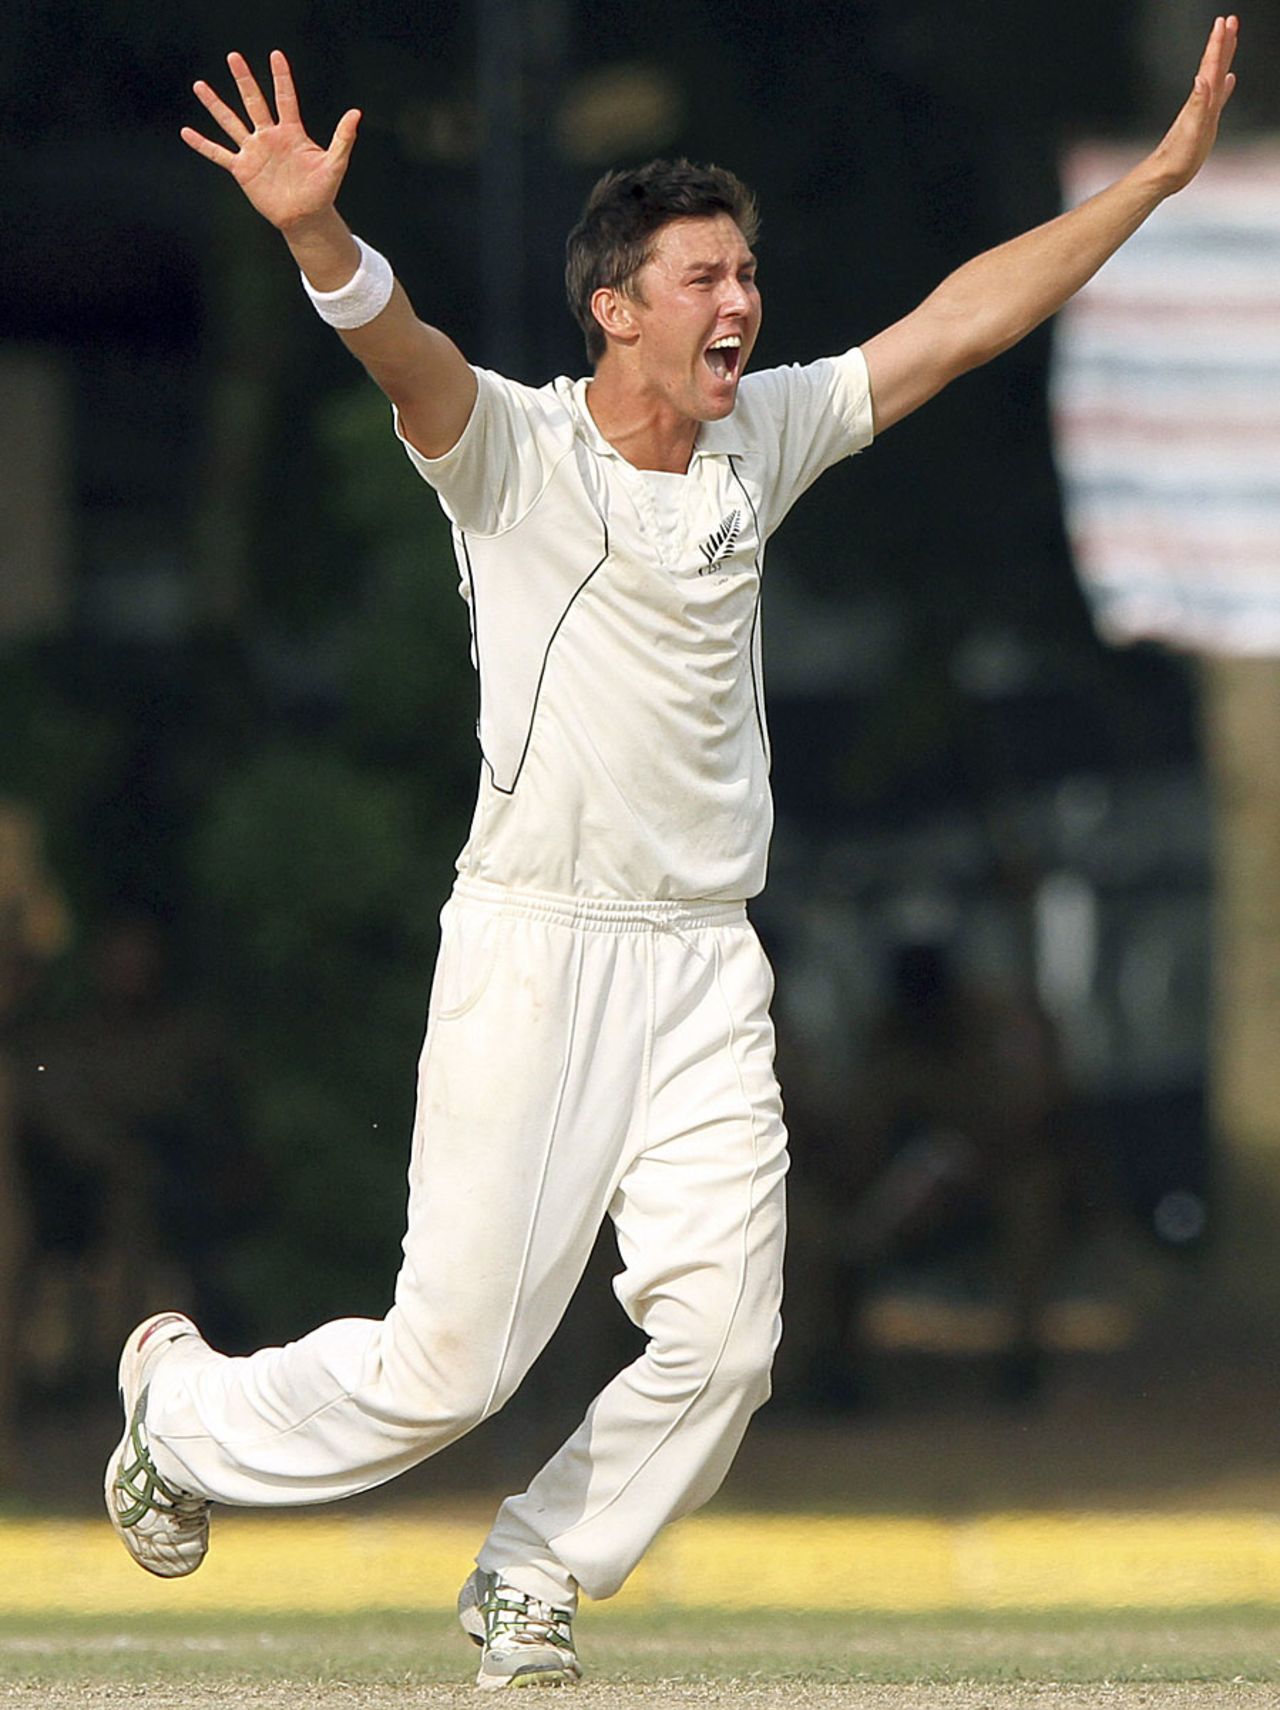 Trent Boult took the final wicket to seal the win, Sri Lanka v New Zealand, 2nd Test, Colombo, 5th day, November 29, 2012